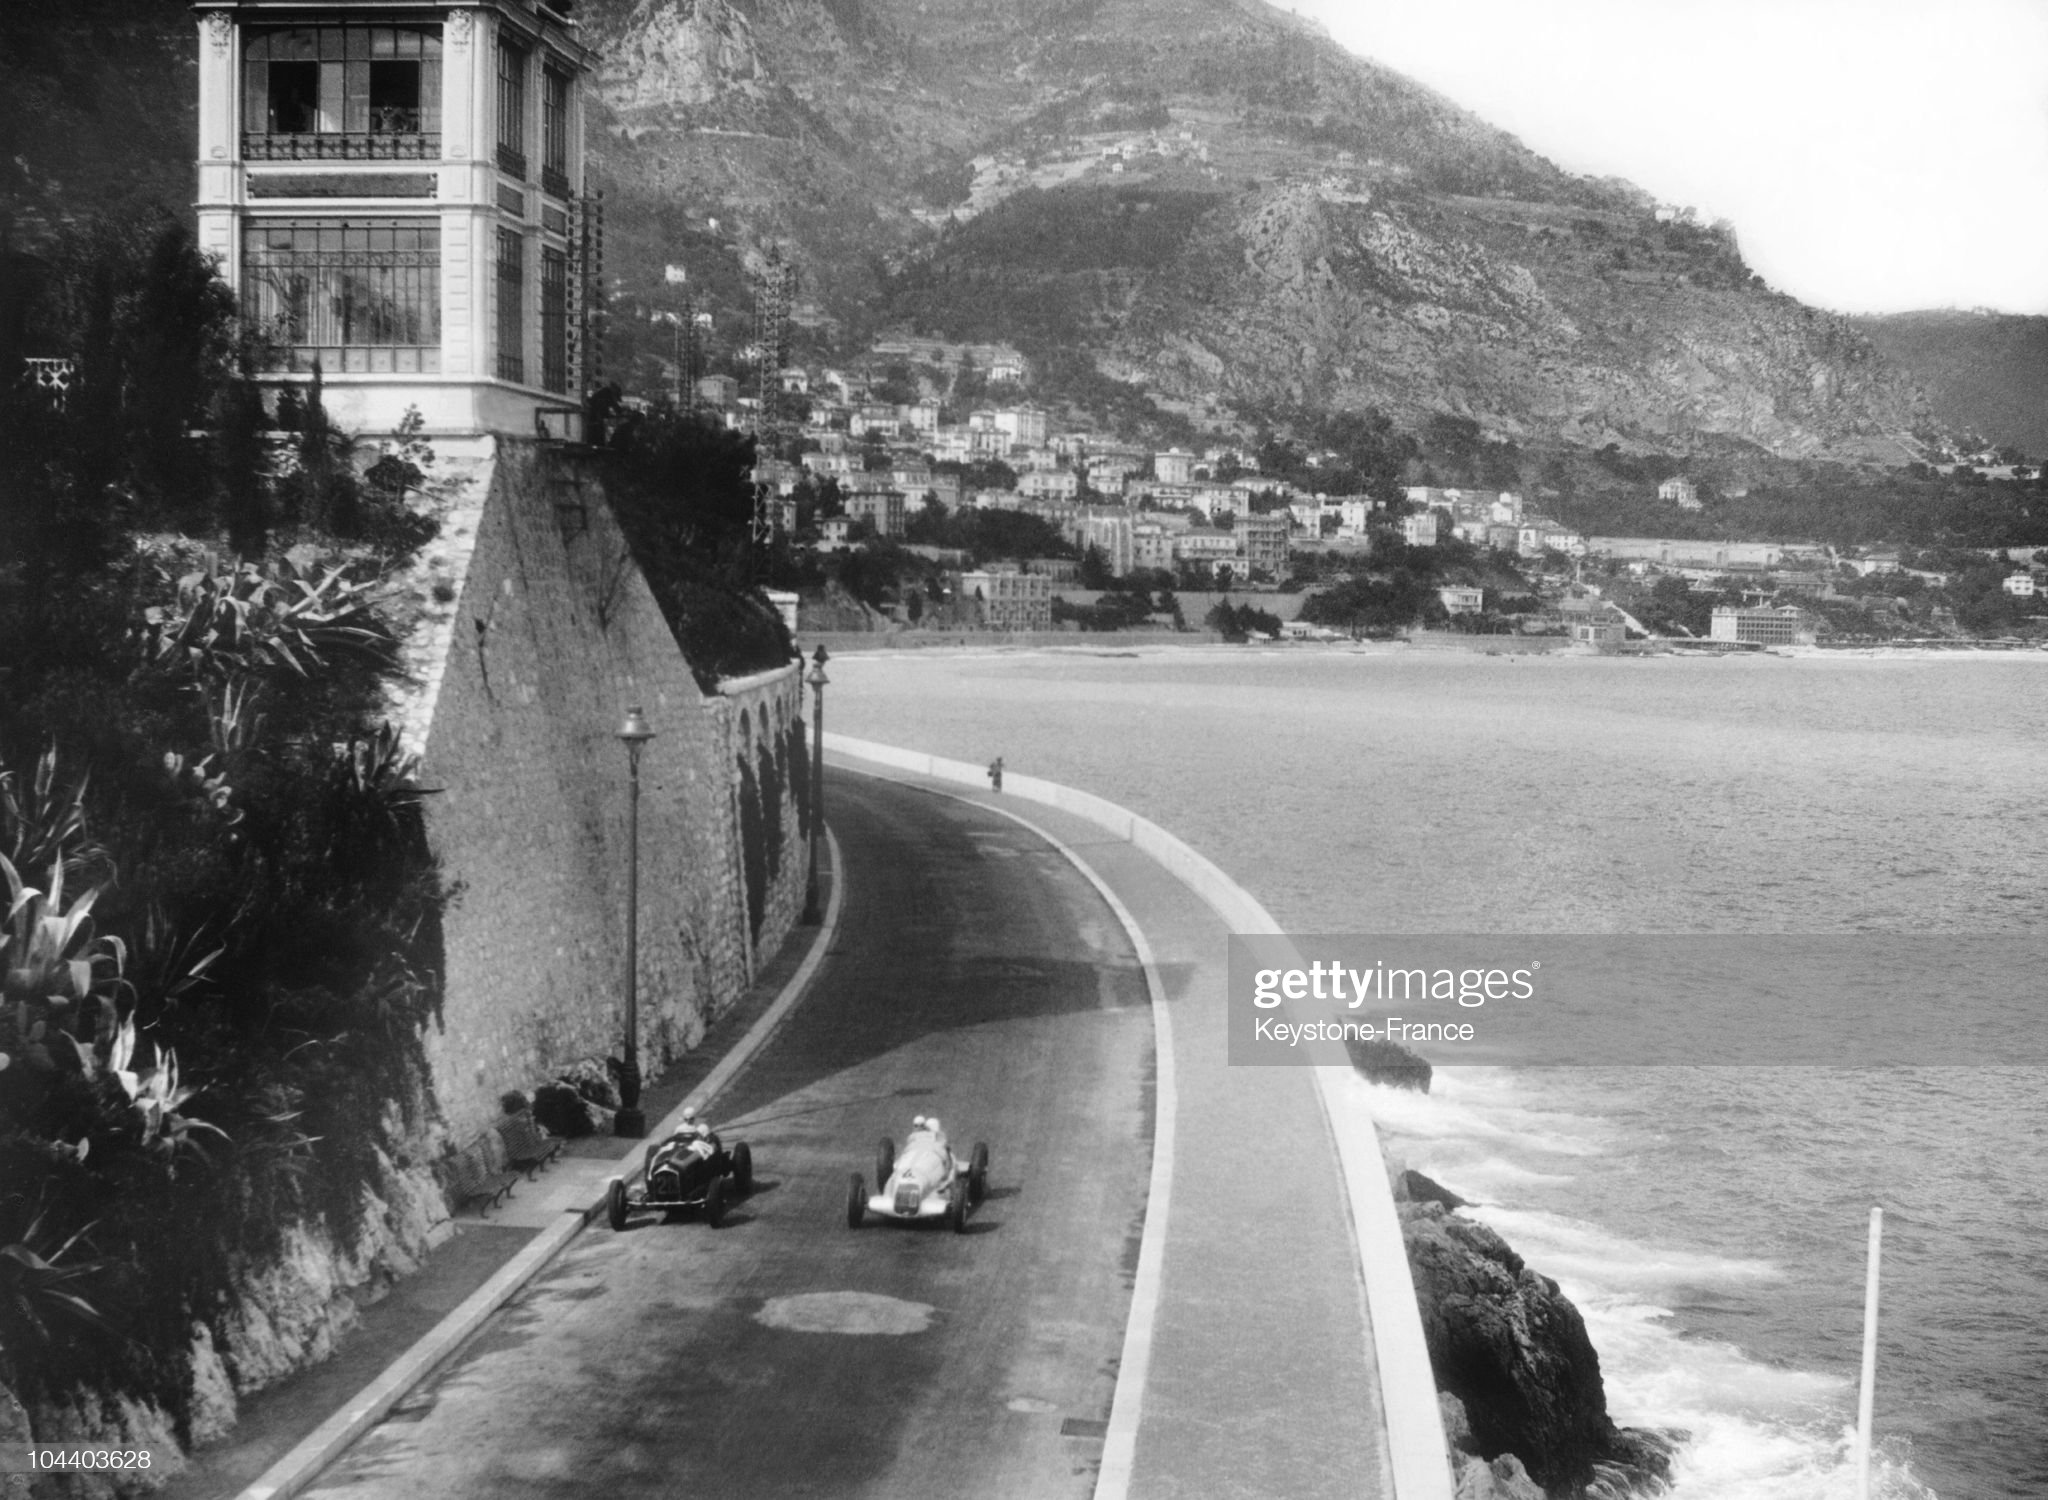 March 24, 1935, Monaco GP. The Italian race car driver Luigi Fagioli in a German car overtaking a competitor on a road along the sea. This race is taking place in the streets of Monaco every year. 